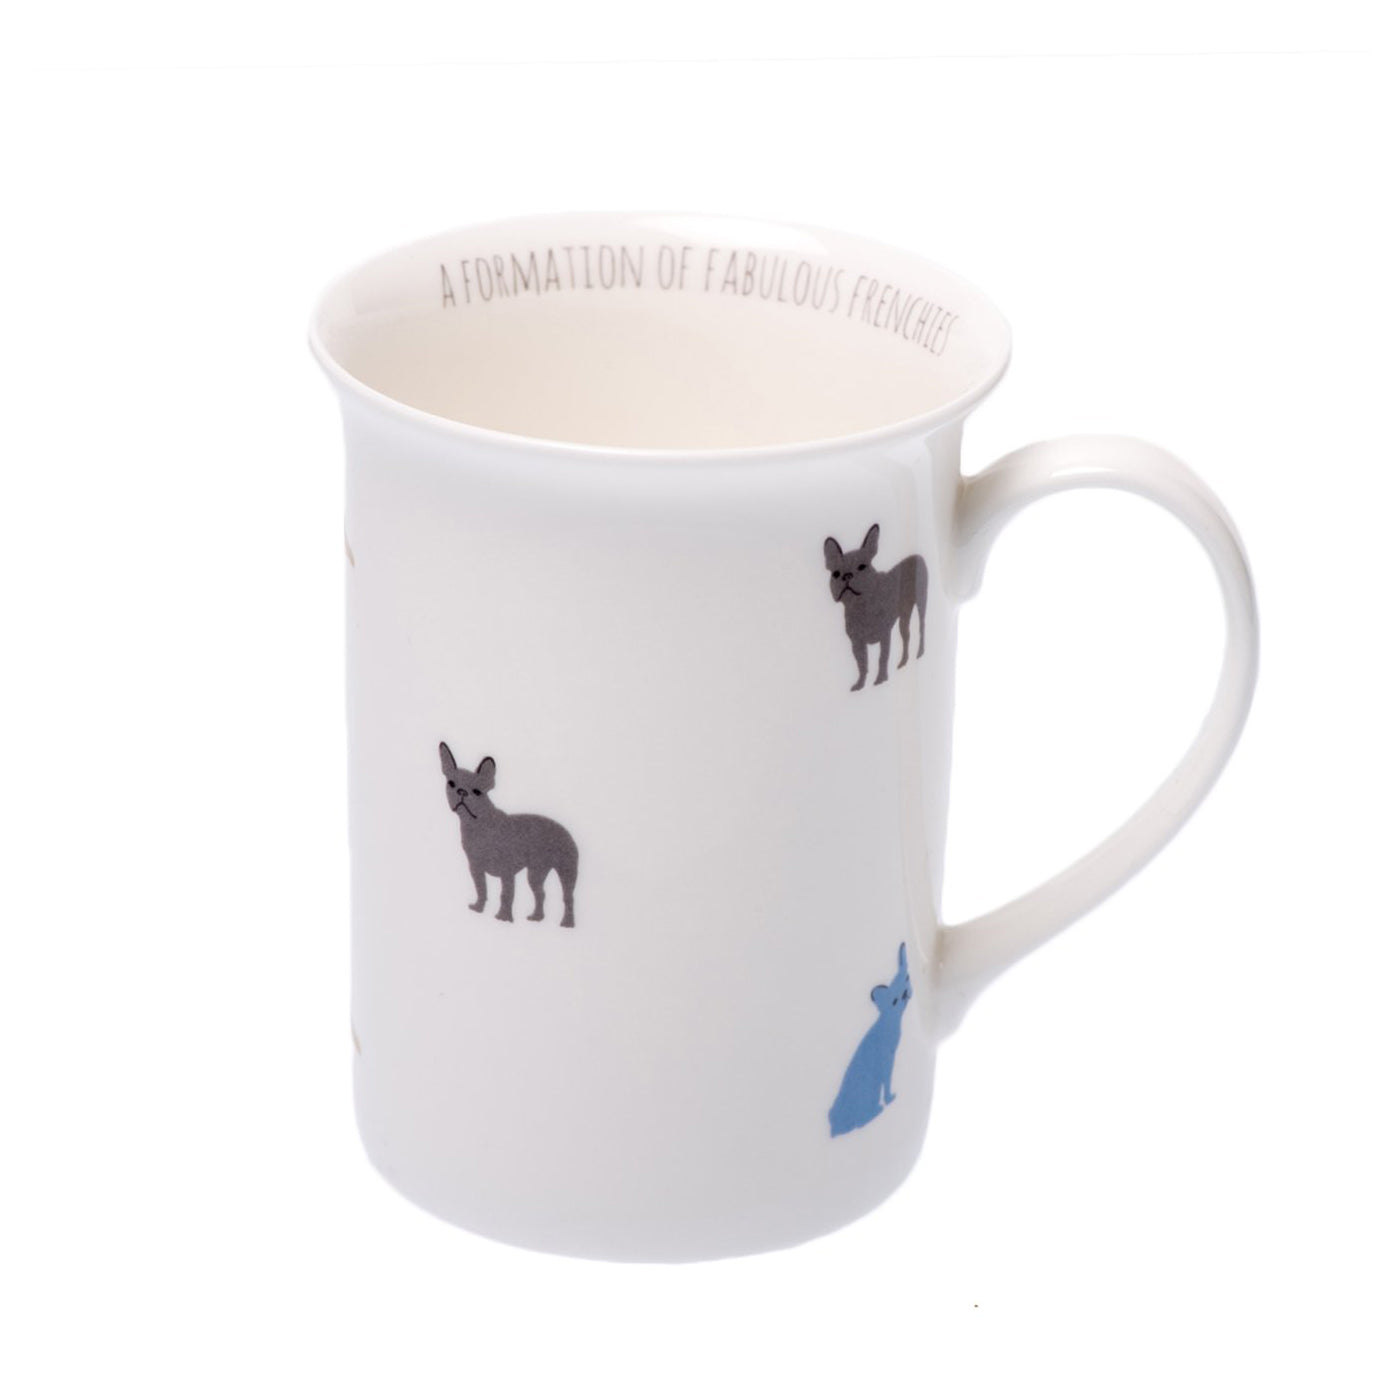 Discover, Lords & Labradors Fabulous Frenchies Mug, Made From Fine Bone China! The Perfect Gift For Frenchie Lovers, Available Now at Lords & Labradors